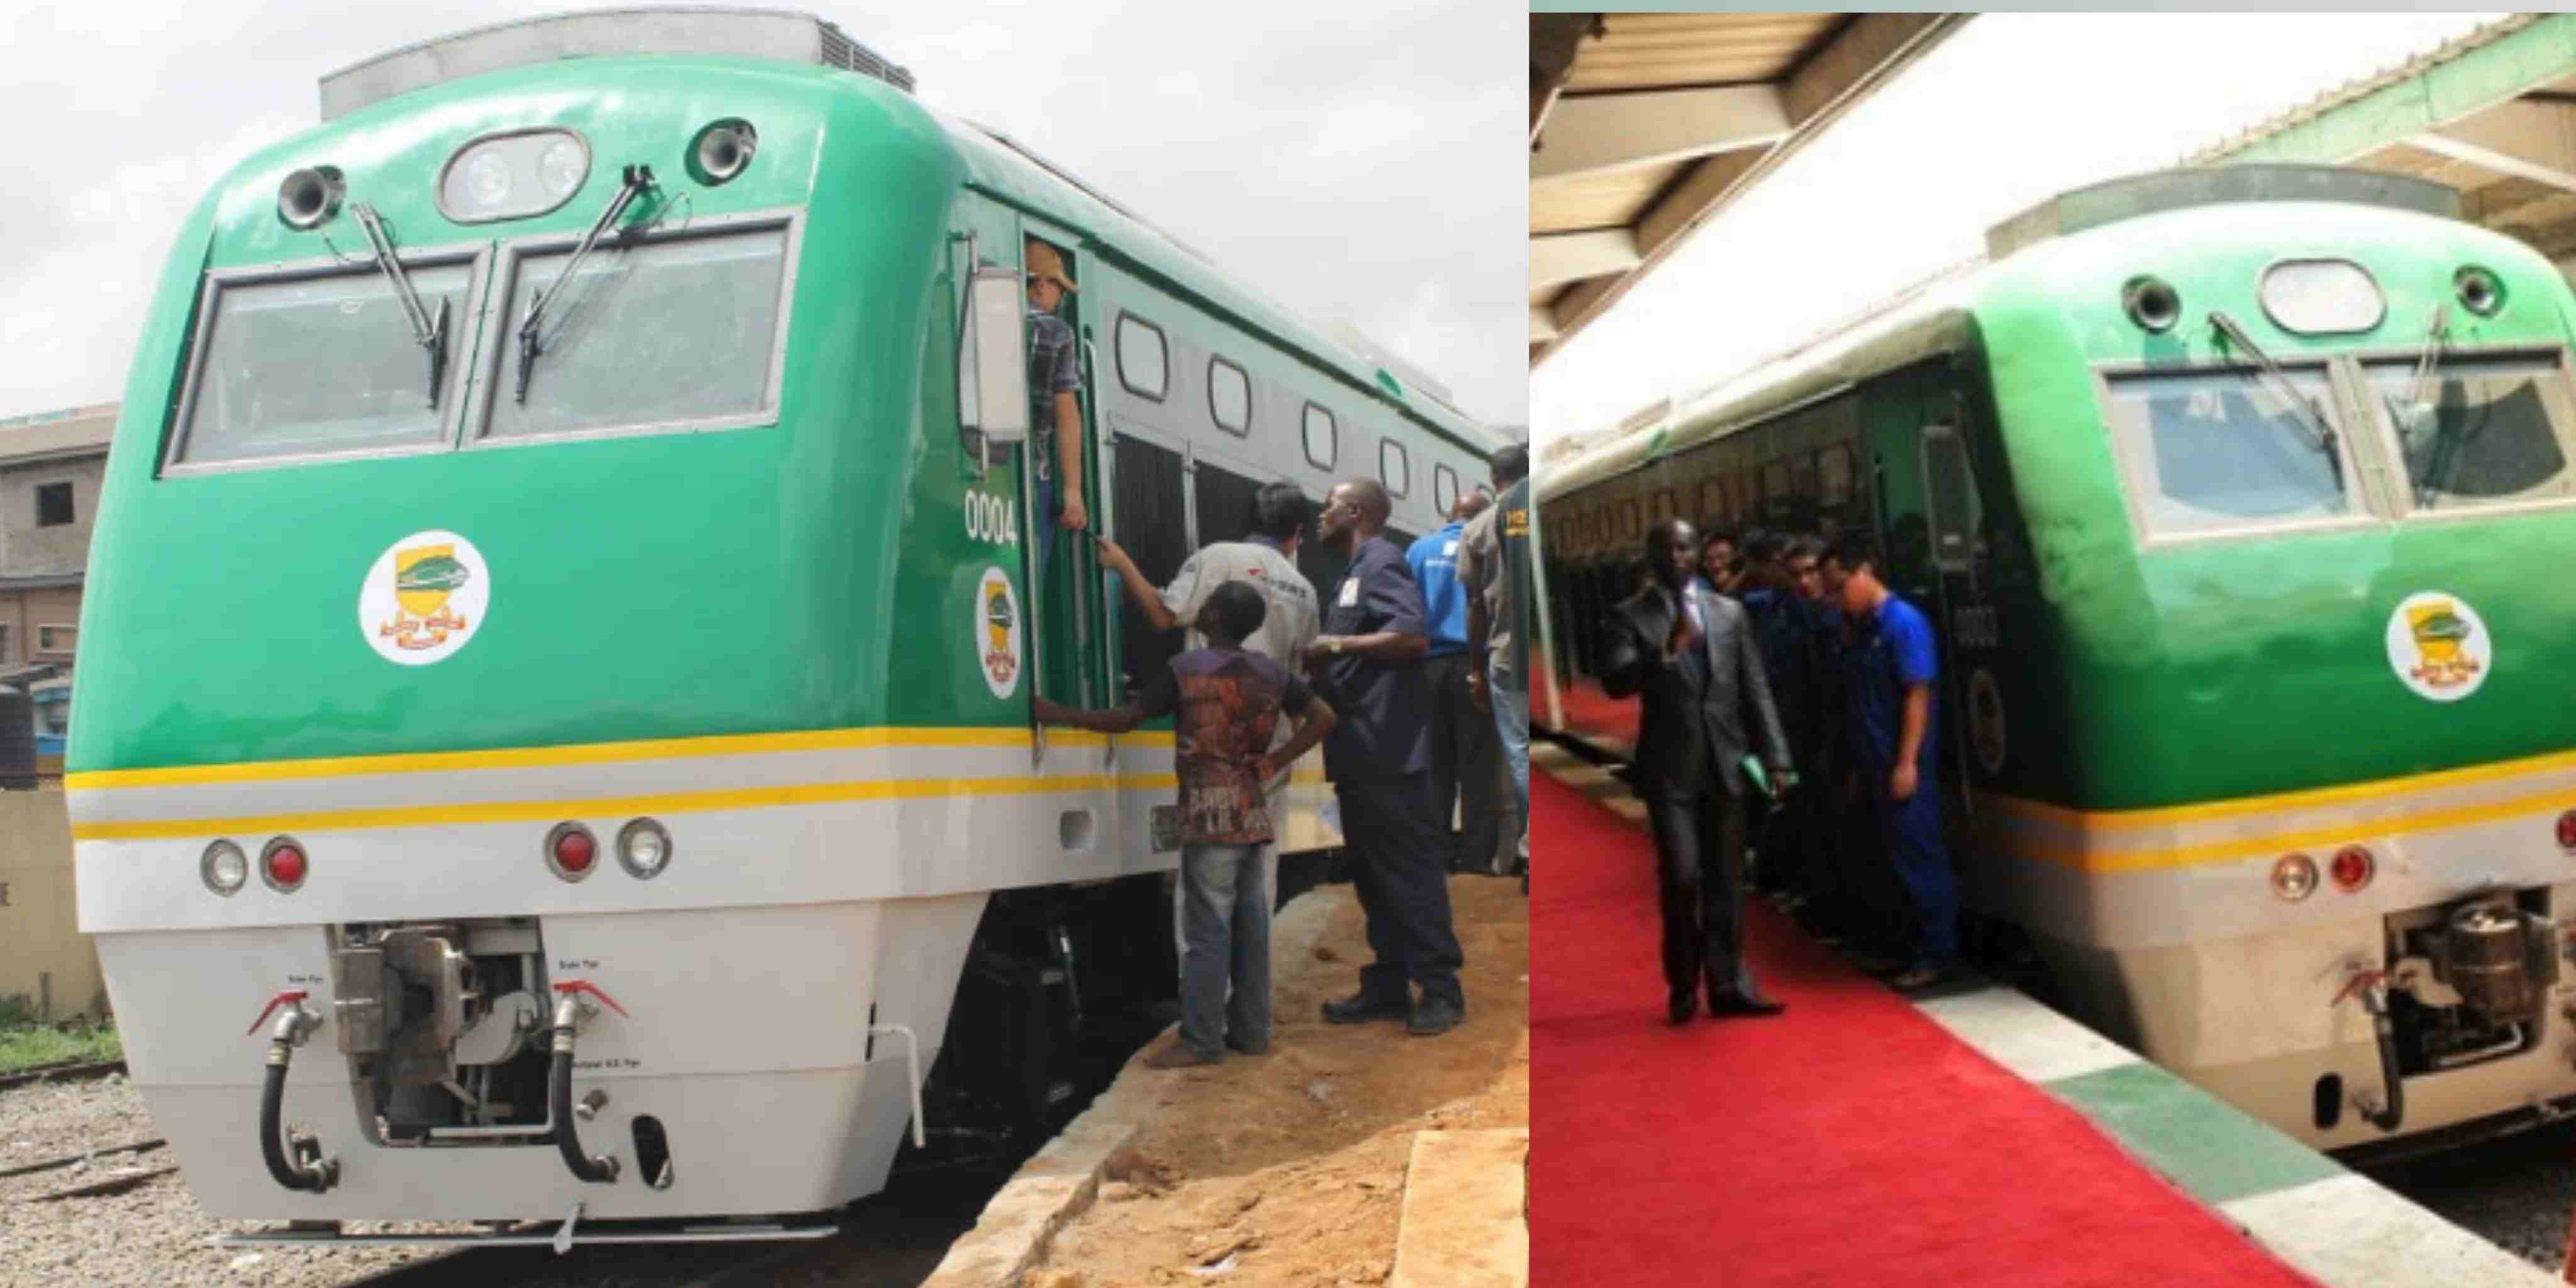 Christmas: FG felicitates with Nigerians; declares free train rides from Dec. 24 to Jan. 4 In light of the Yuletide season, the Nigerian Government felicitates citizens as it declares free train rides from Dec.24 to Jan 4, 2022. The Managing Director of the Nigeria Railway Corporation (NRC), Mr Fidet Okhiria noted that the decision was made in collaboration with the Ministry of Transportation in a bid to ease movement of citizens during the yuletide. Speaking in an interview with the News Agency of Nigeria (NAN) on Friday in Abuja, Mr. Fidet said, ”This is to help ease the cost of transportation and enable citizens to move easily enjoy the festive period."